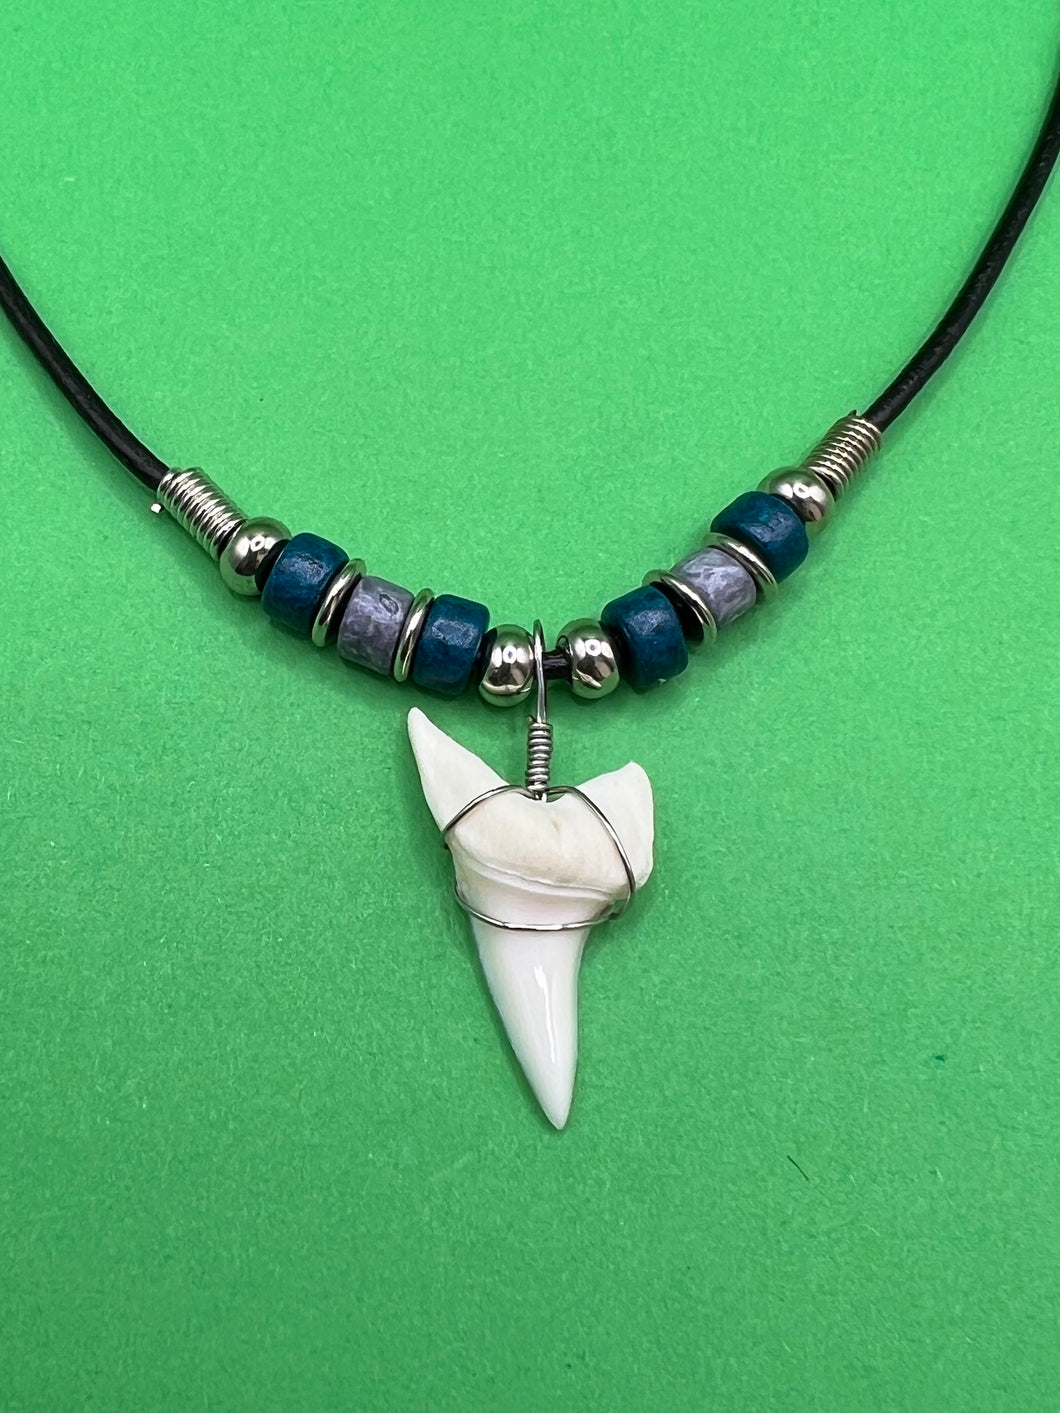 White Shark Tooth Necklace With 3 Bead Design Dark Blue and Gray